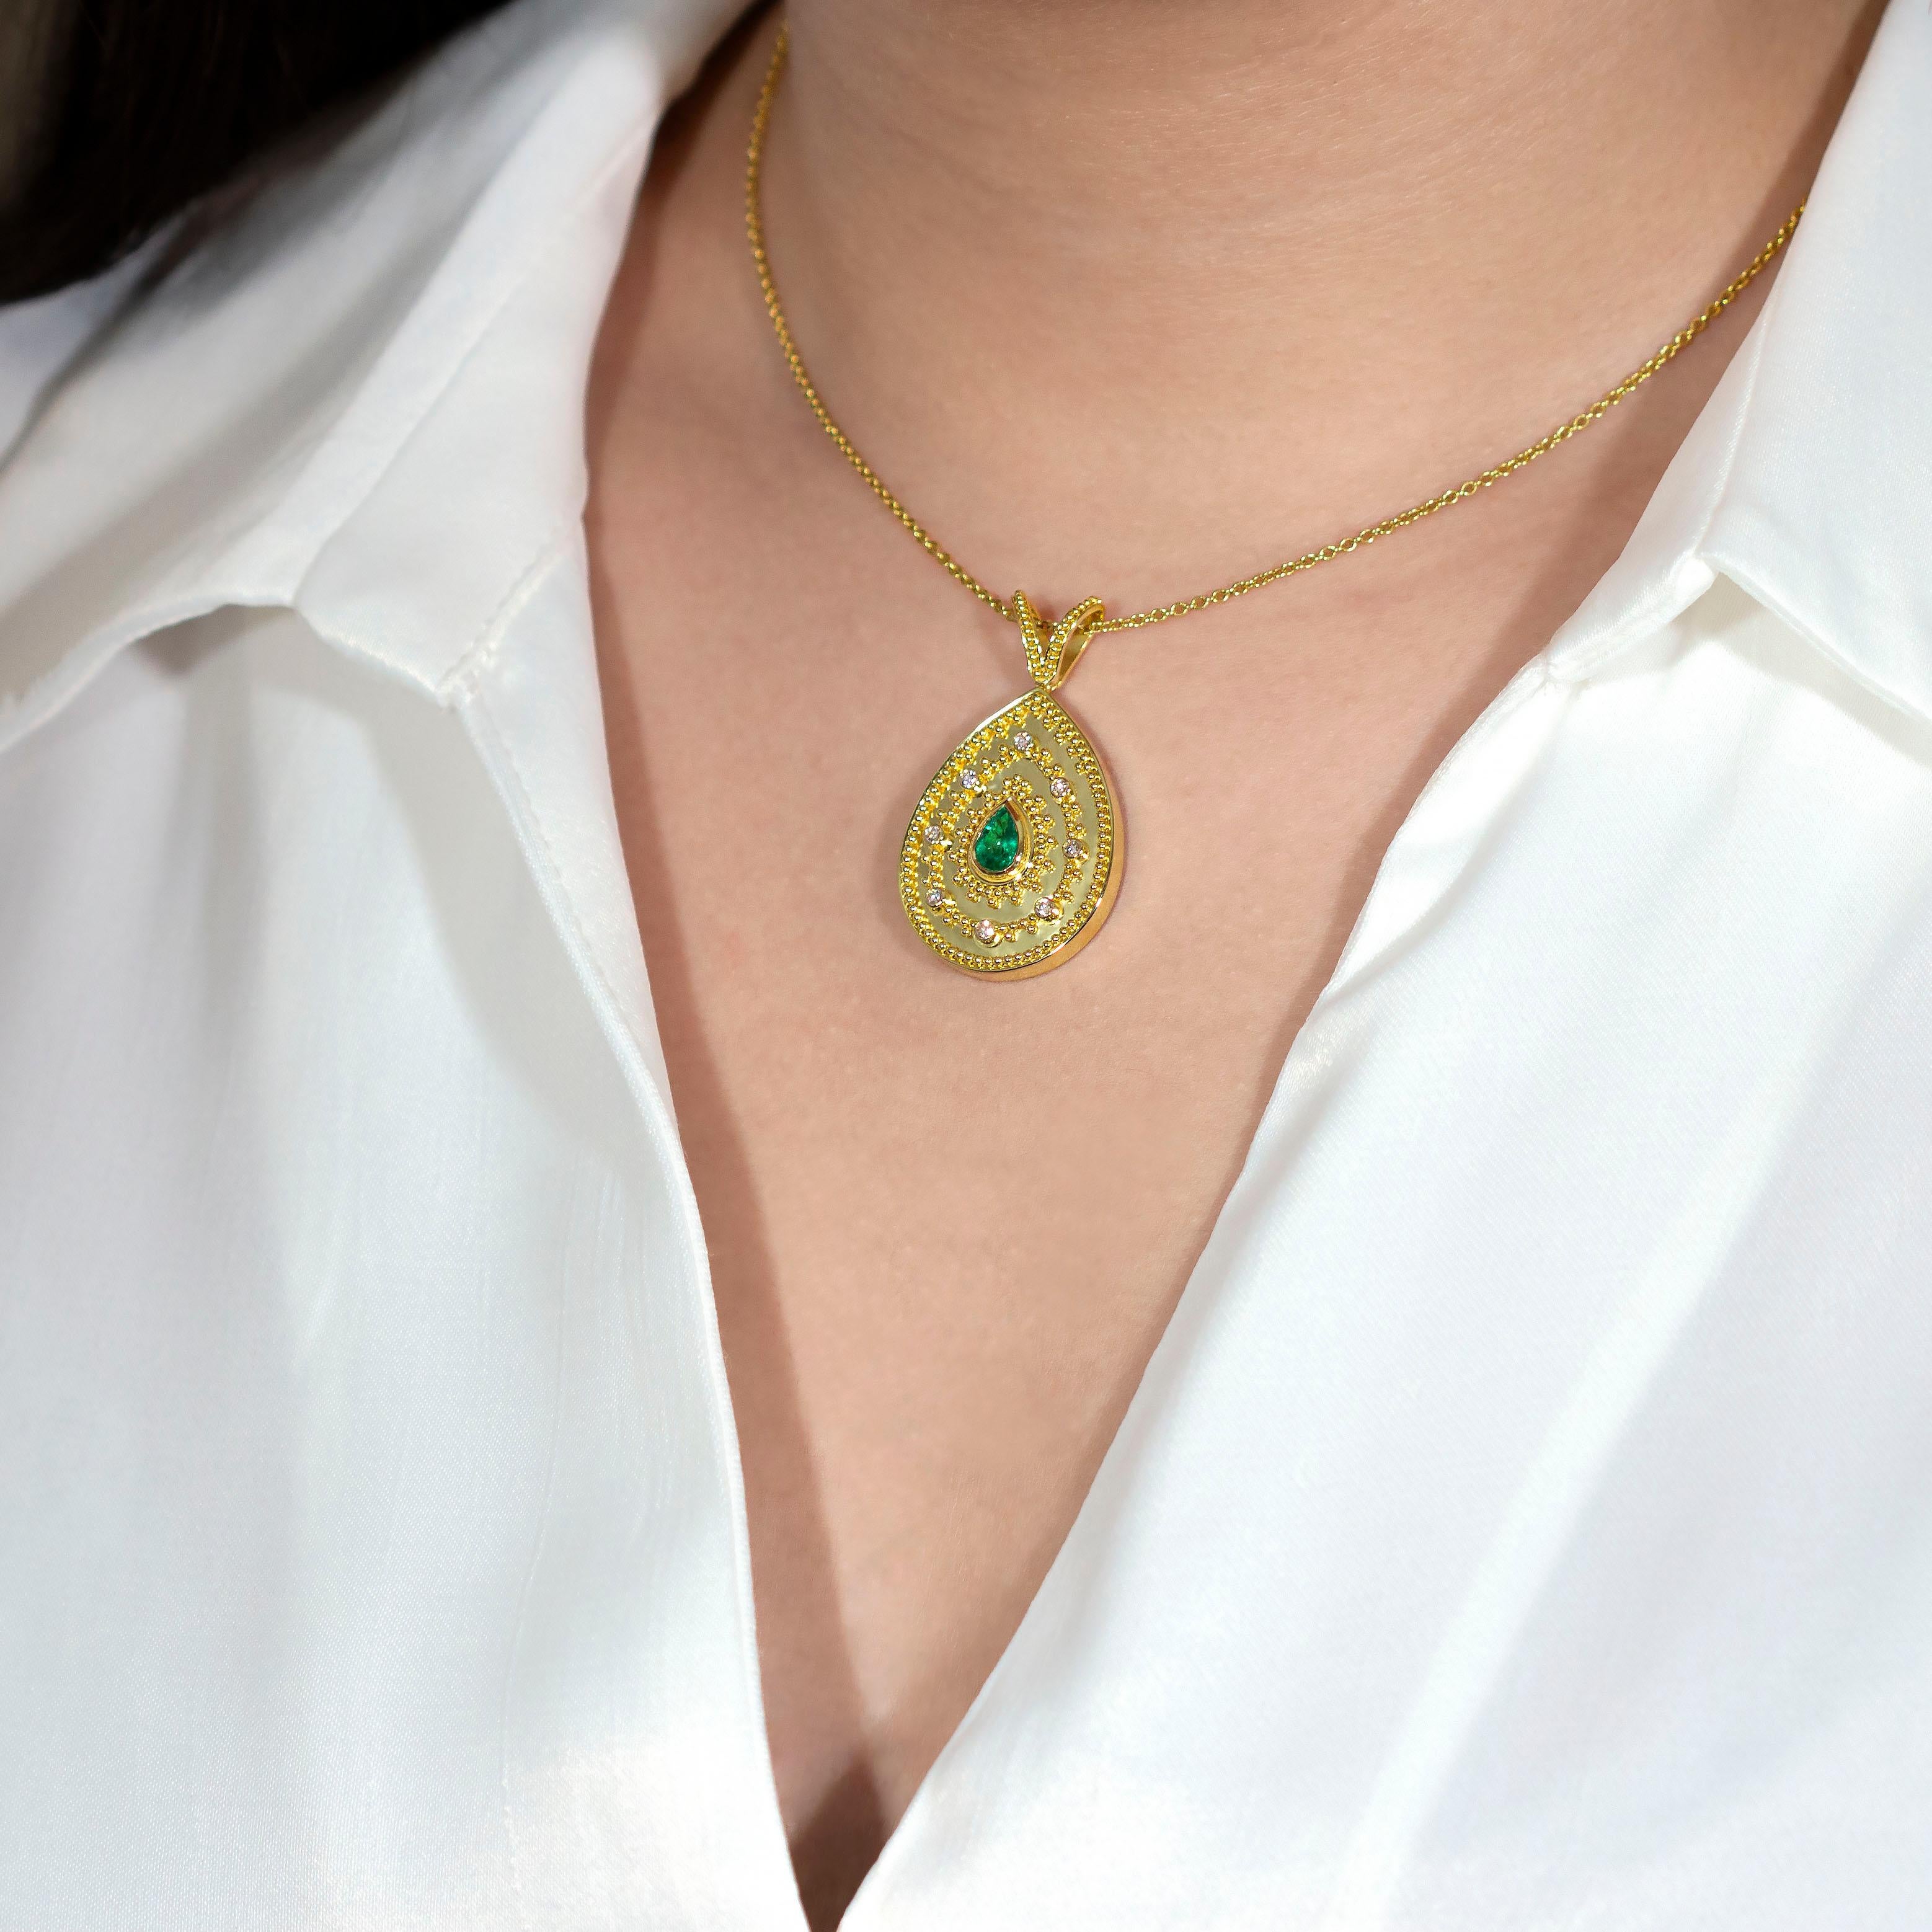 This beautiful gold pendant features stunning pear-cut emerald, accented with round brilliant-cut diamonds for added sparkle. With its timeless design, this piece of jewelry is sure to make a lasting impression.

100% handmade in our